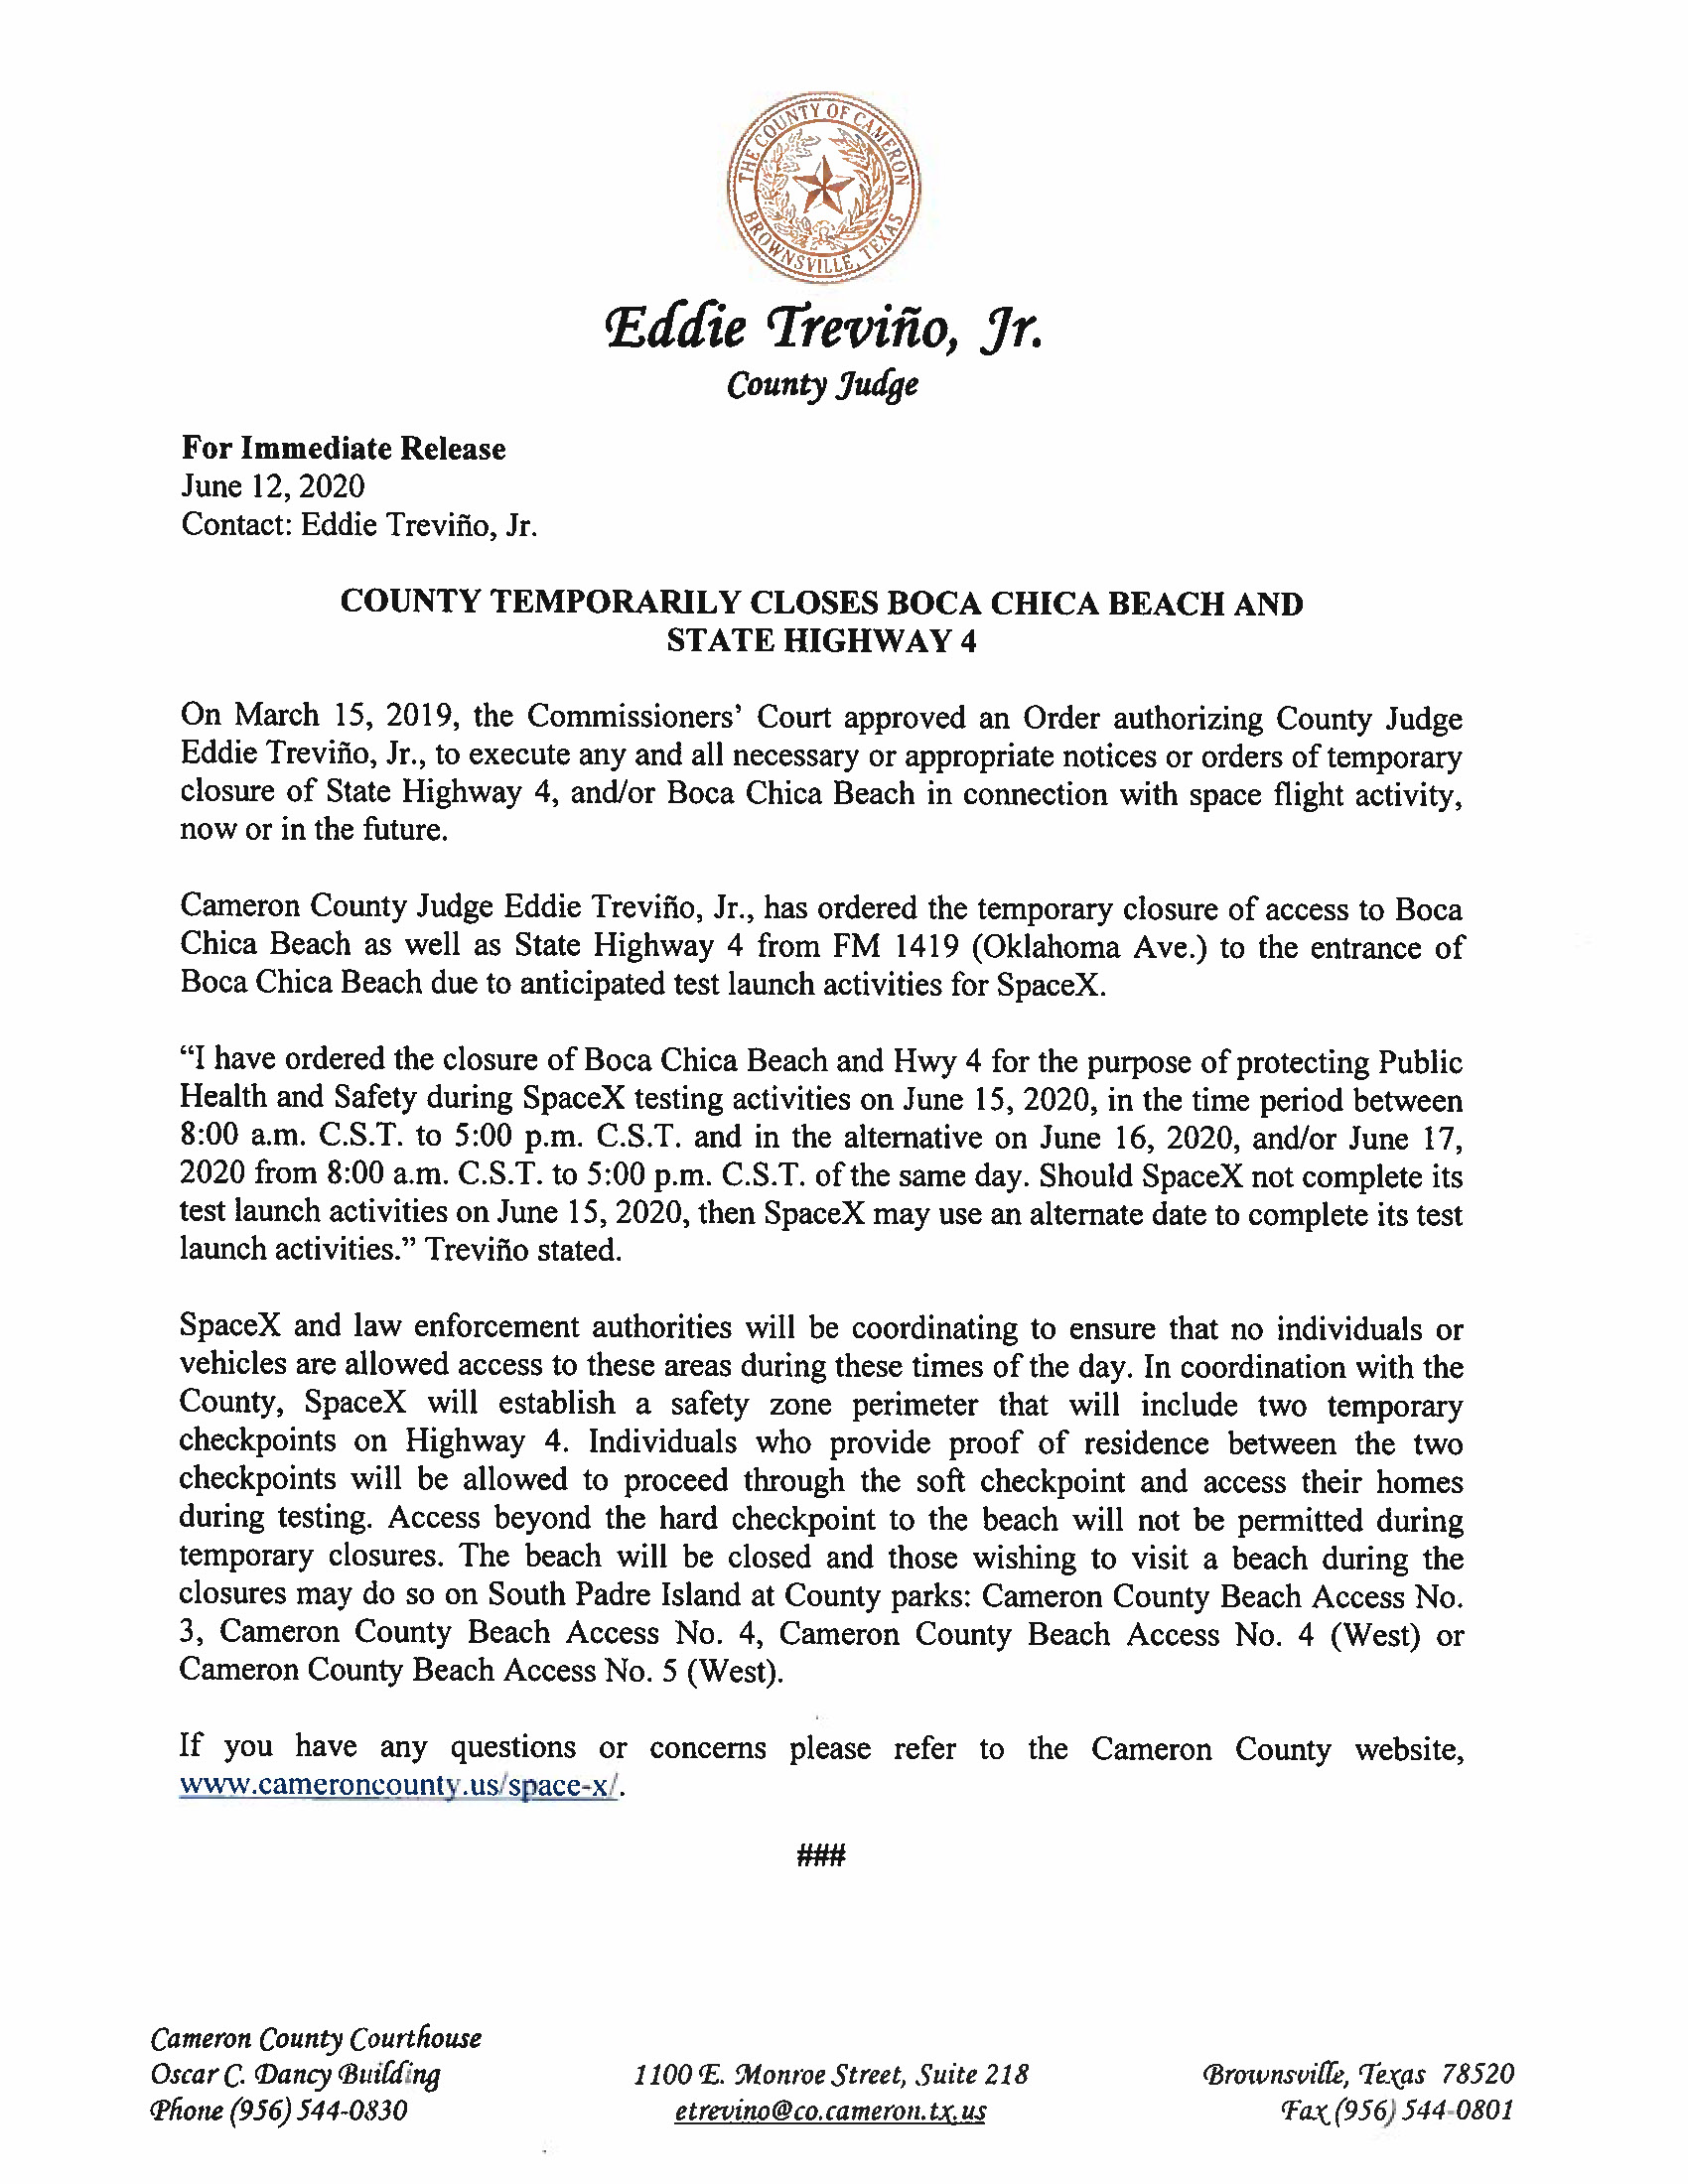 Press Release In English And Spanish.06.15.2020 002 Page 1